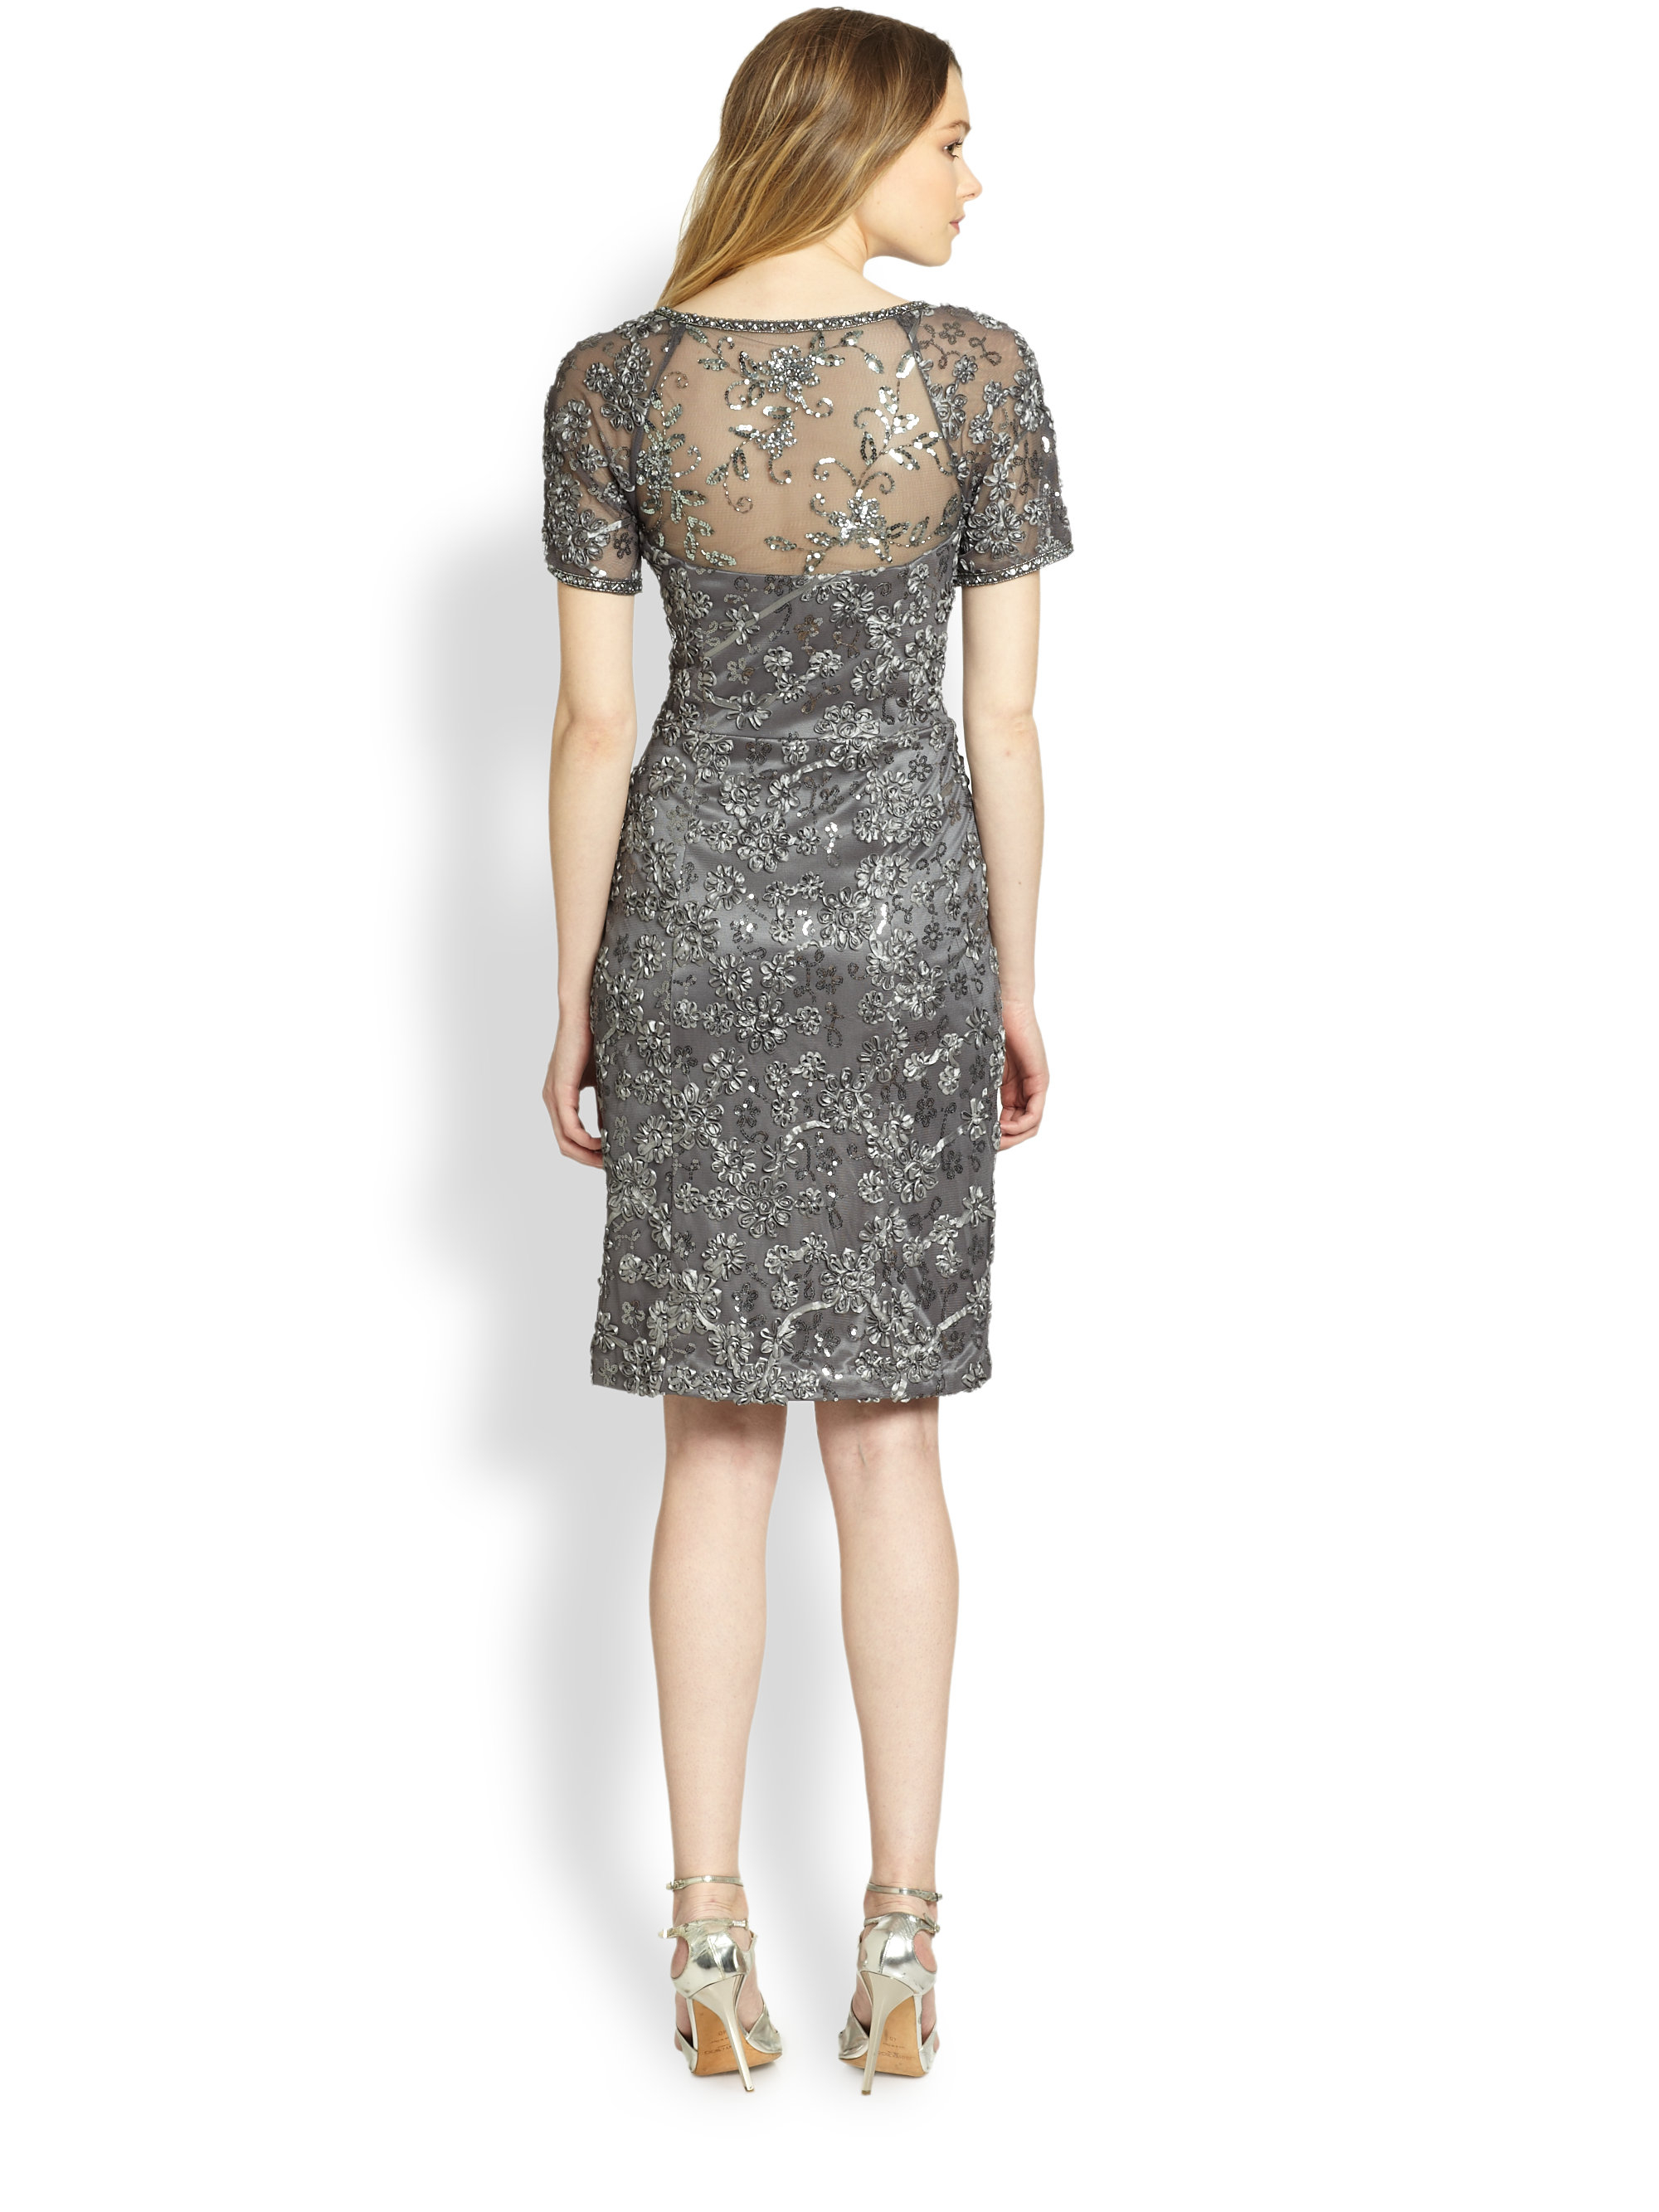 Lyst - Sue wong Illusion-top Cocktail Dress in Gray